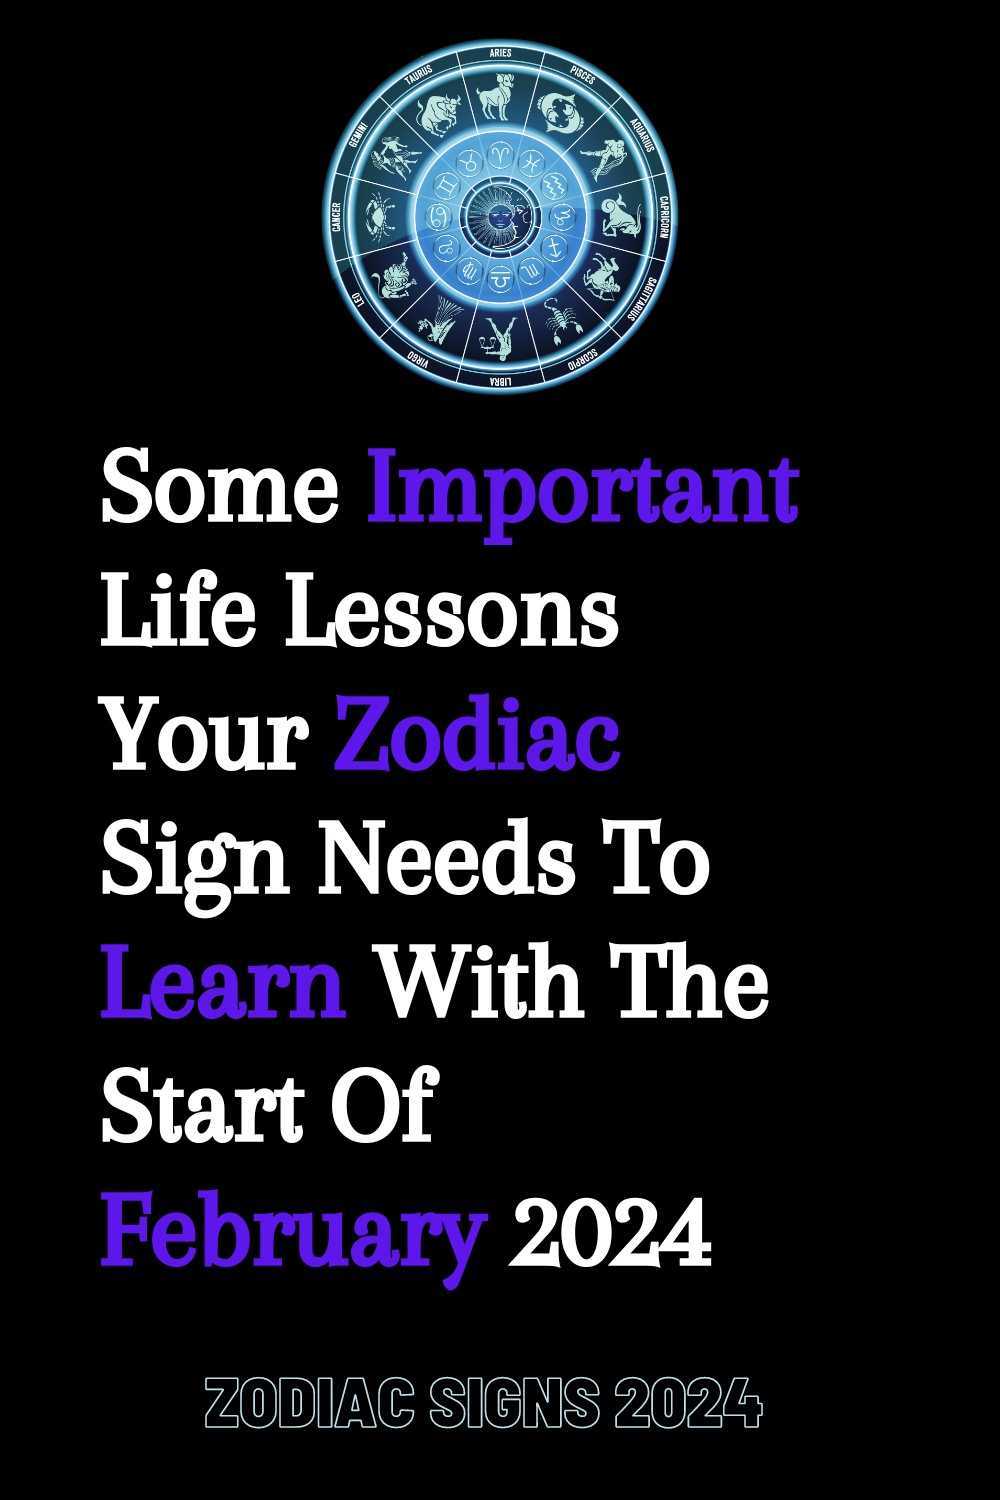 Some Important Life Lessons Your Zodiac Sign Needs To Learn With The Start Of February 2024